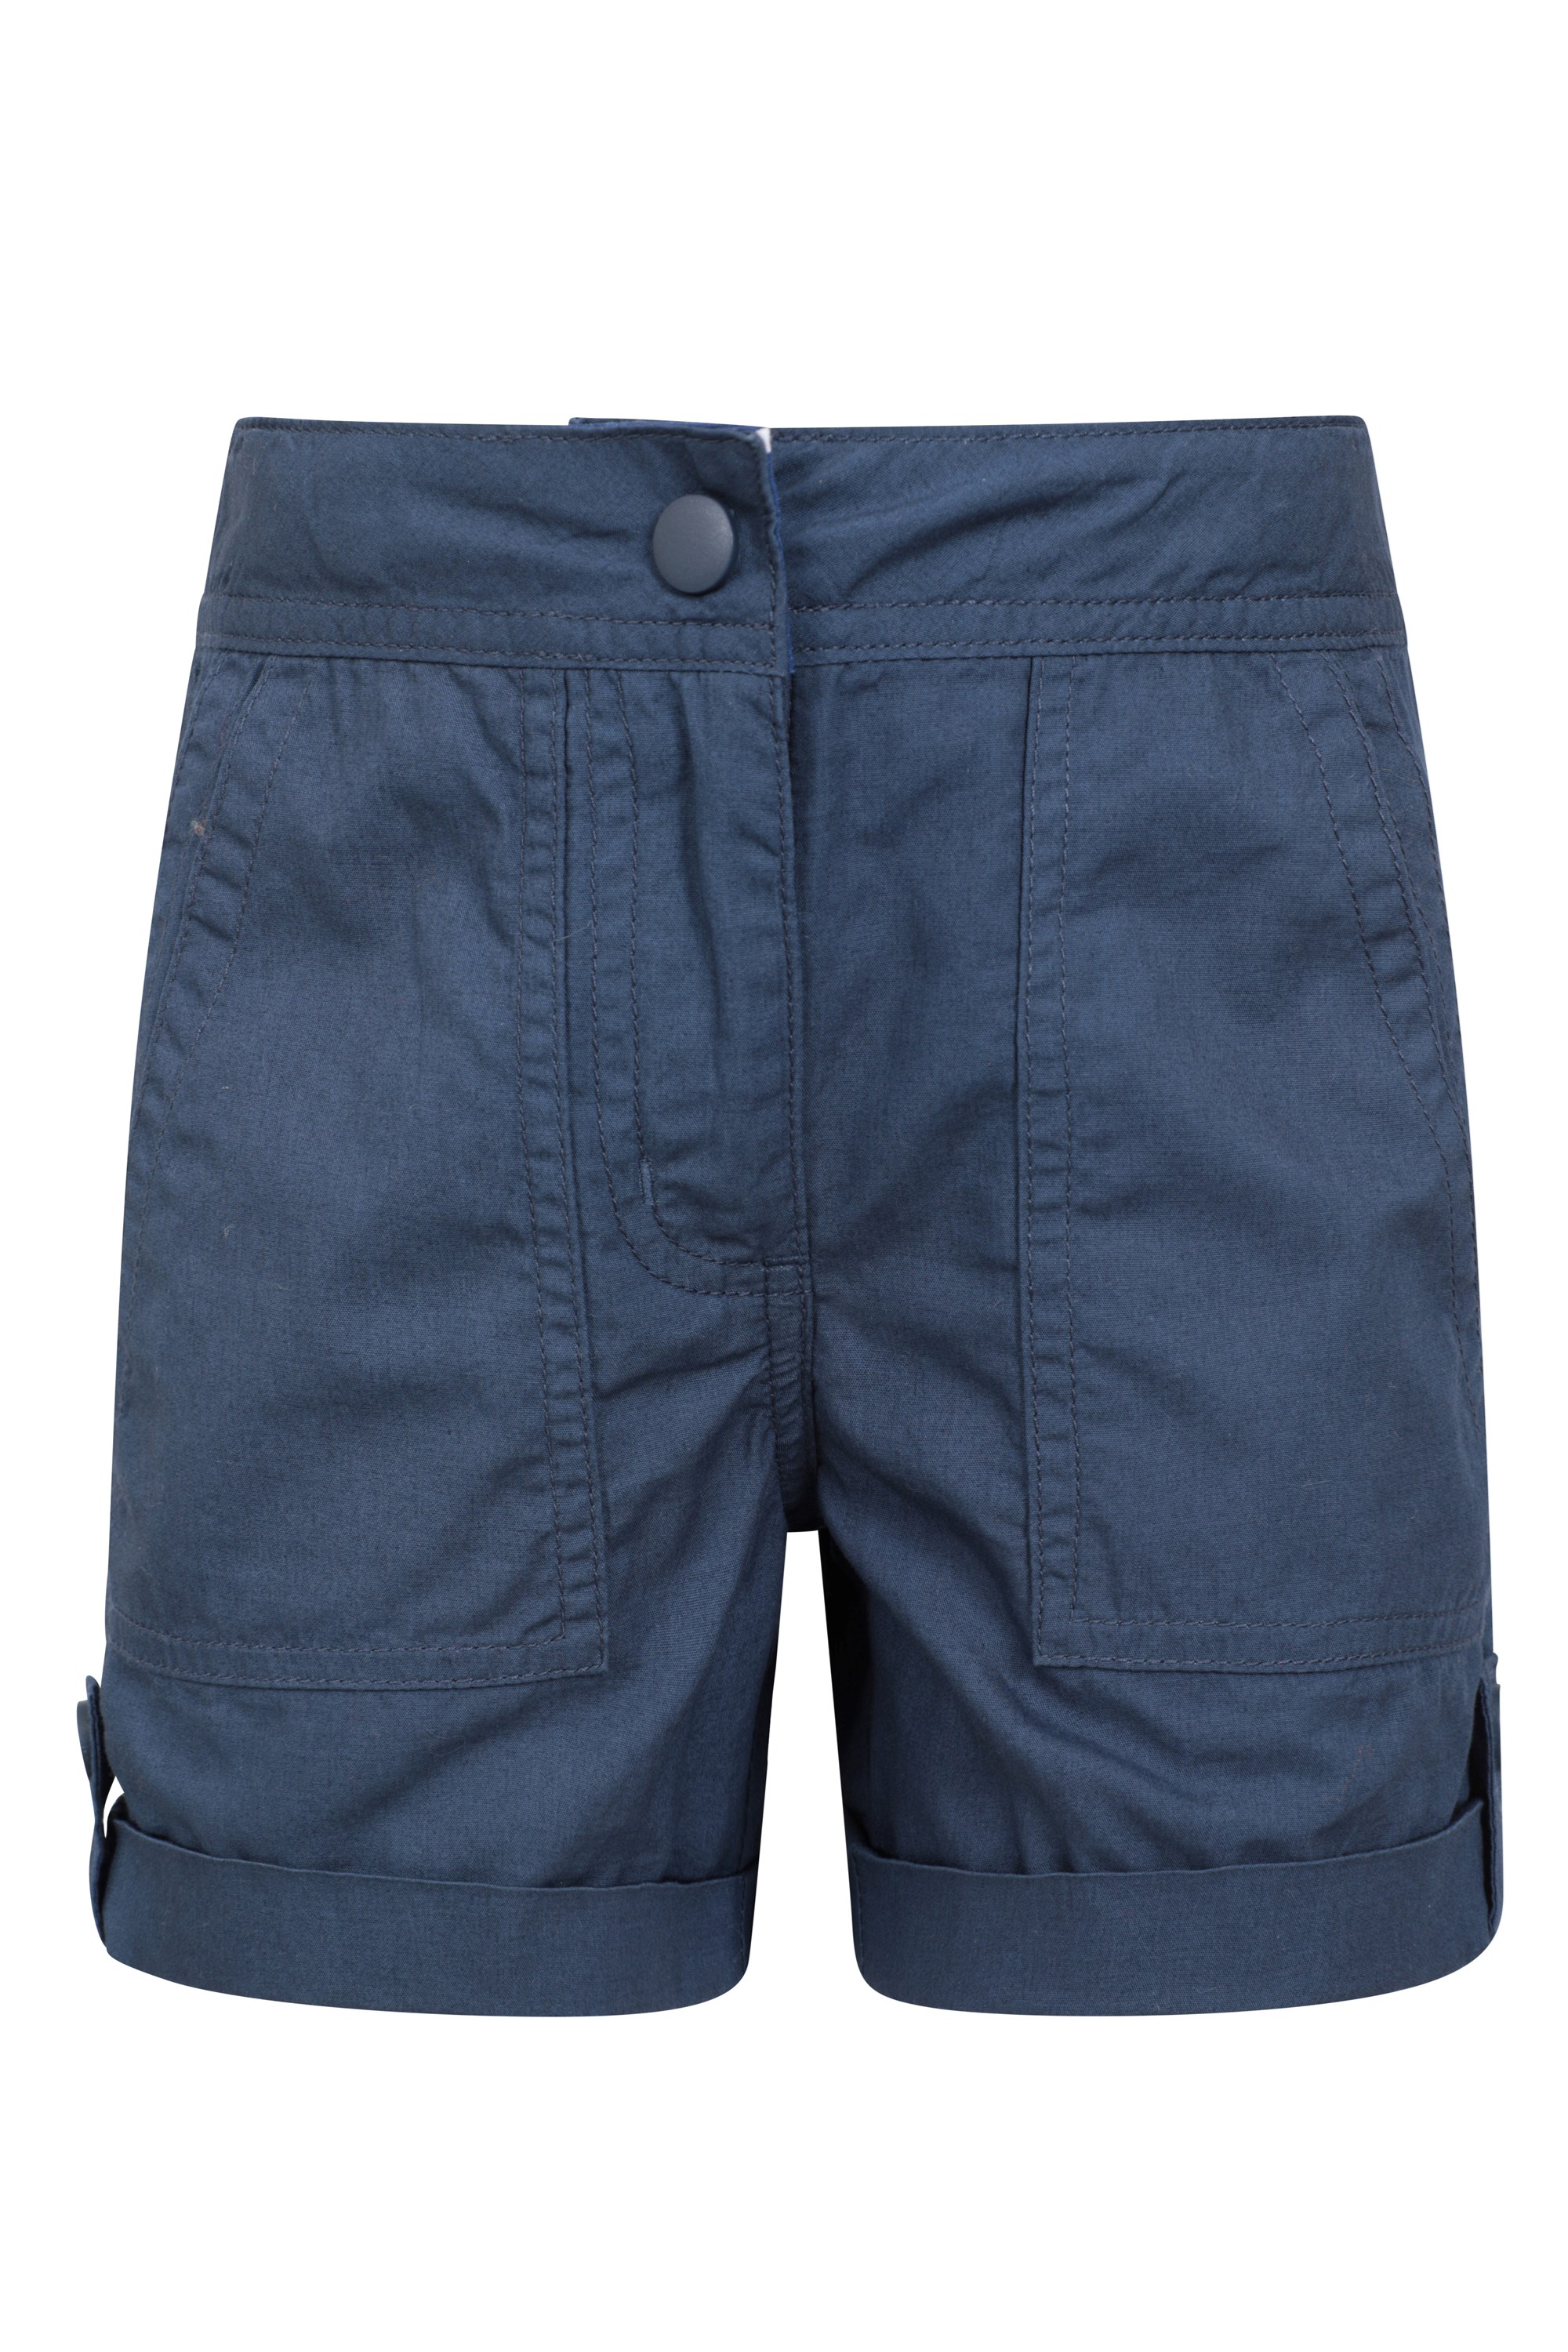 Mountain Warehouse Girls Blue shorts from Mountain Warehouse Age 13 Years Brand New With Tags 